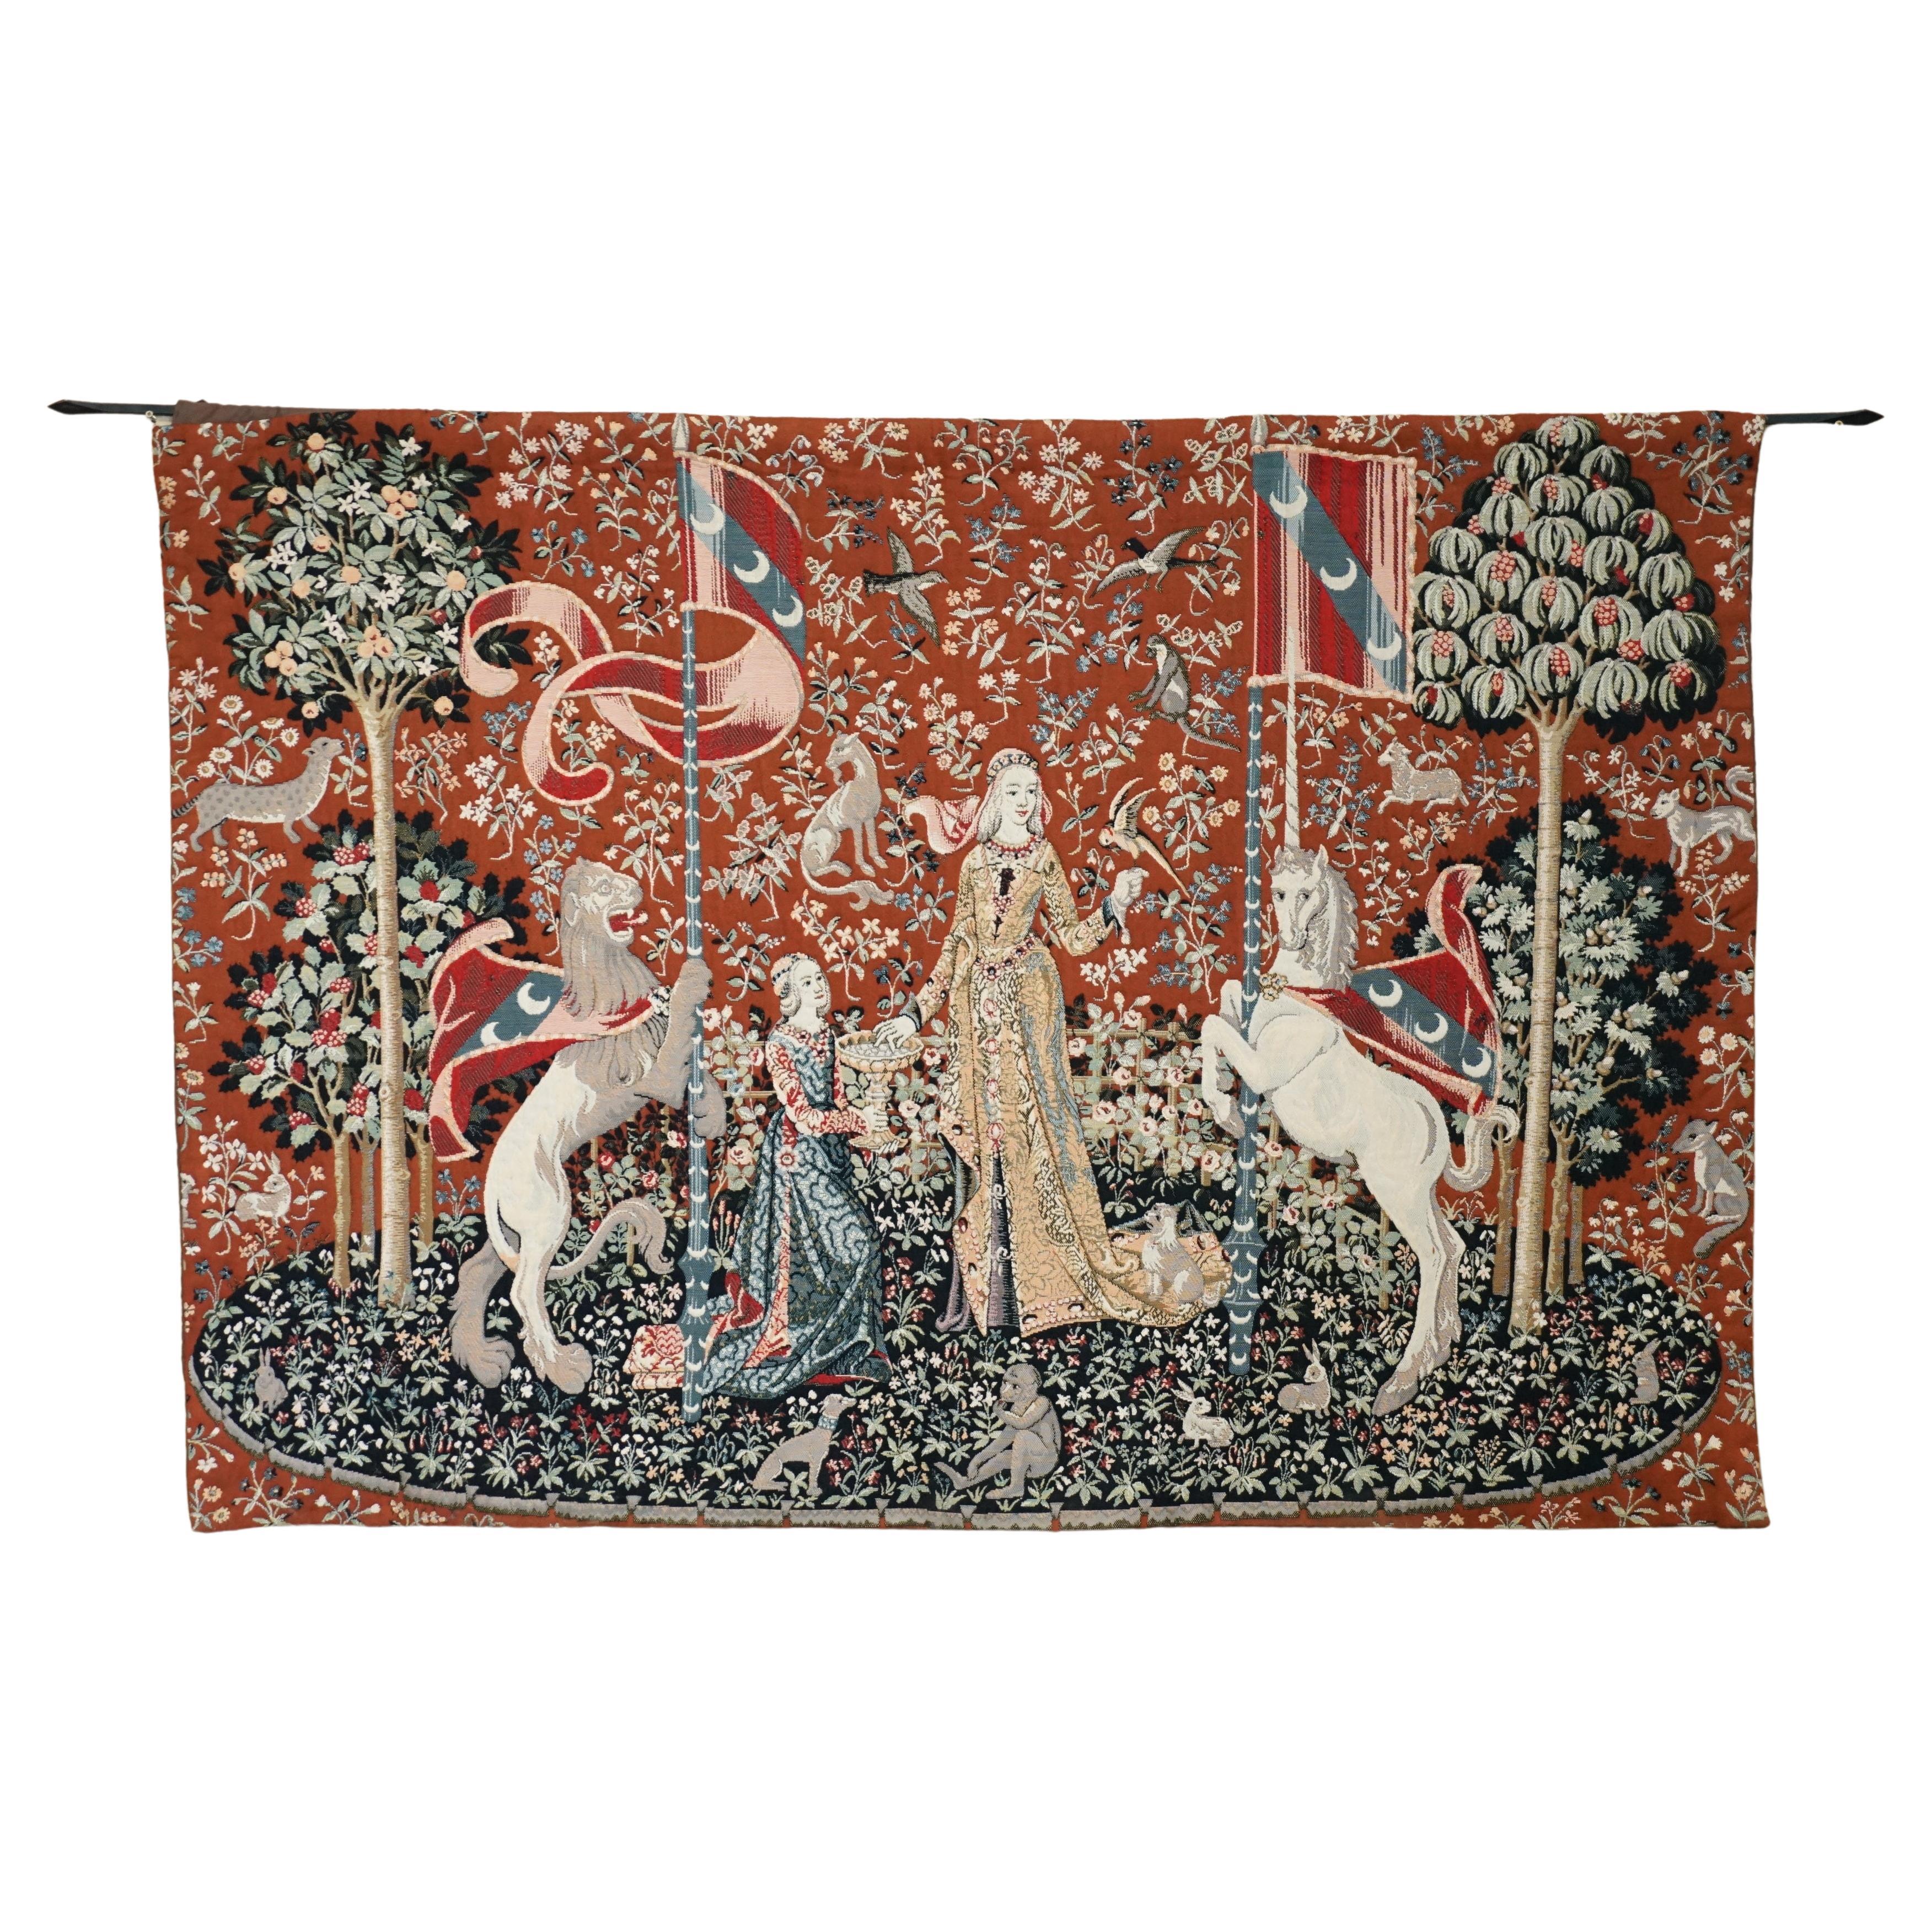 ViNTAGE THE LADY AND THE UNICORN LARGE WALL HANGING WOVEN TAPESTRY 216CM X 189CM For Sale